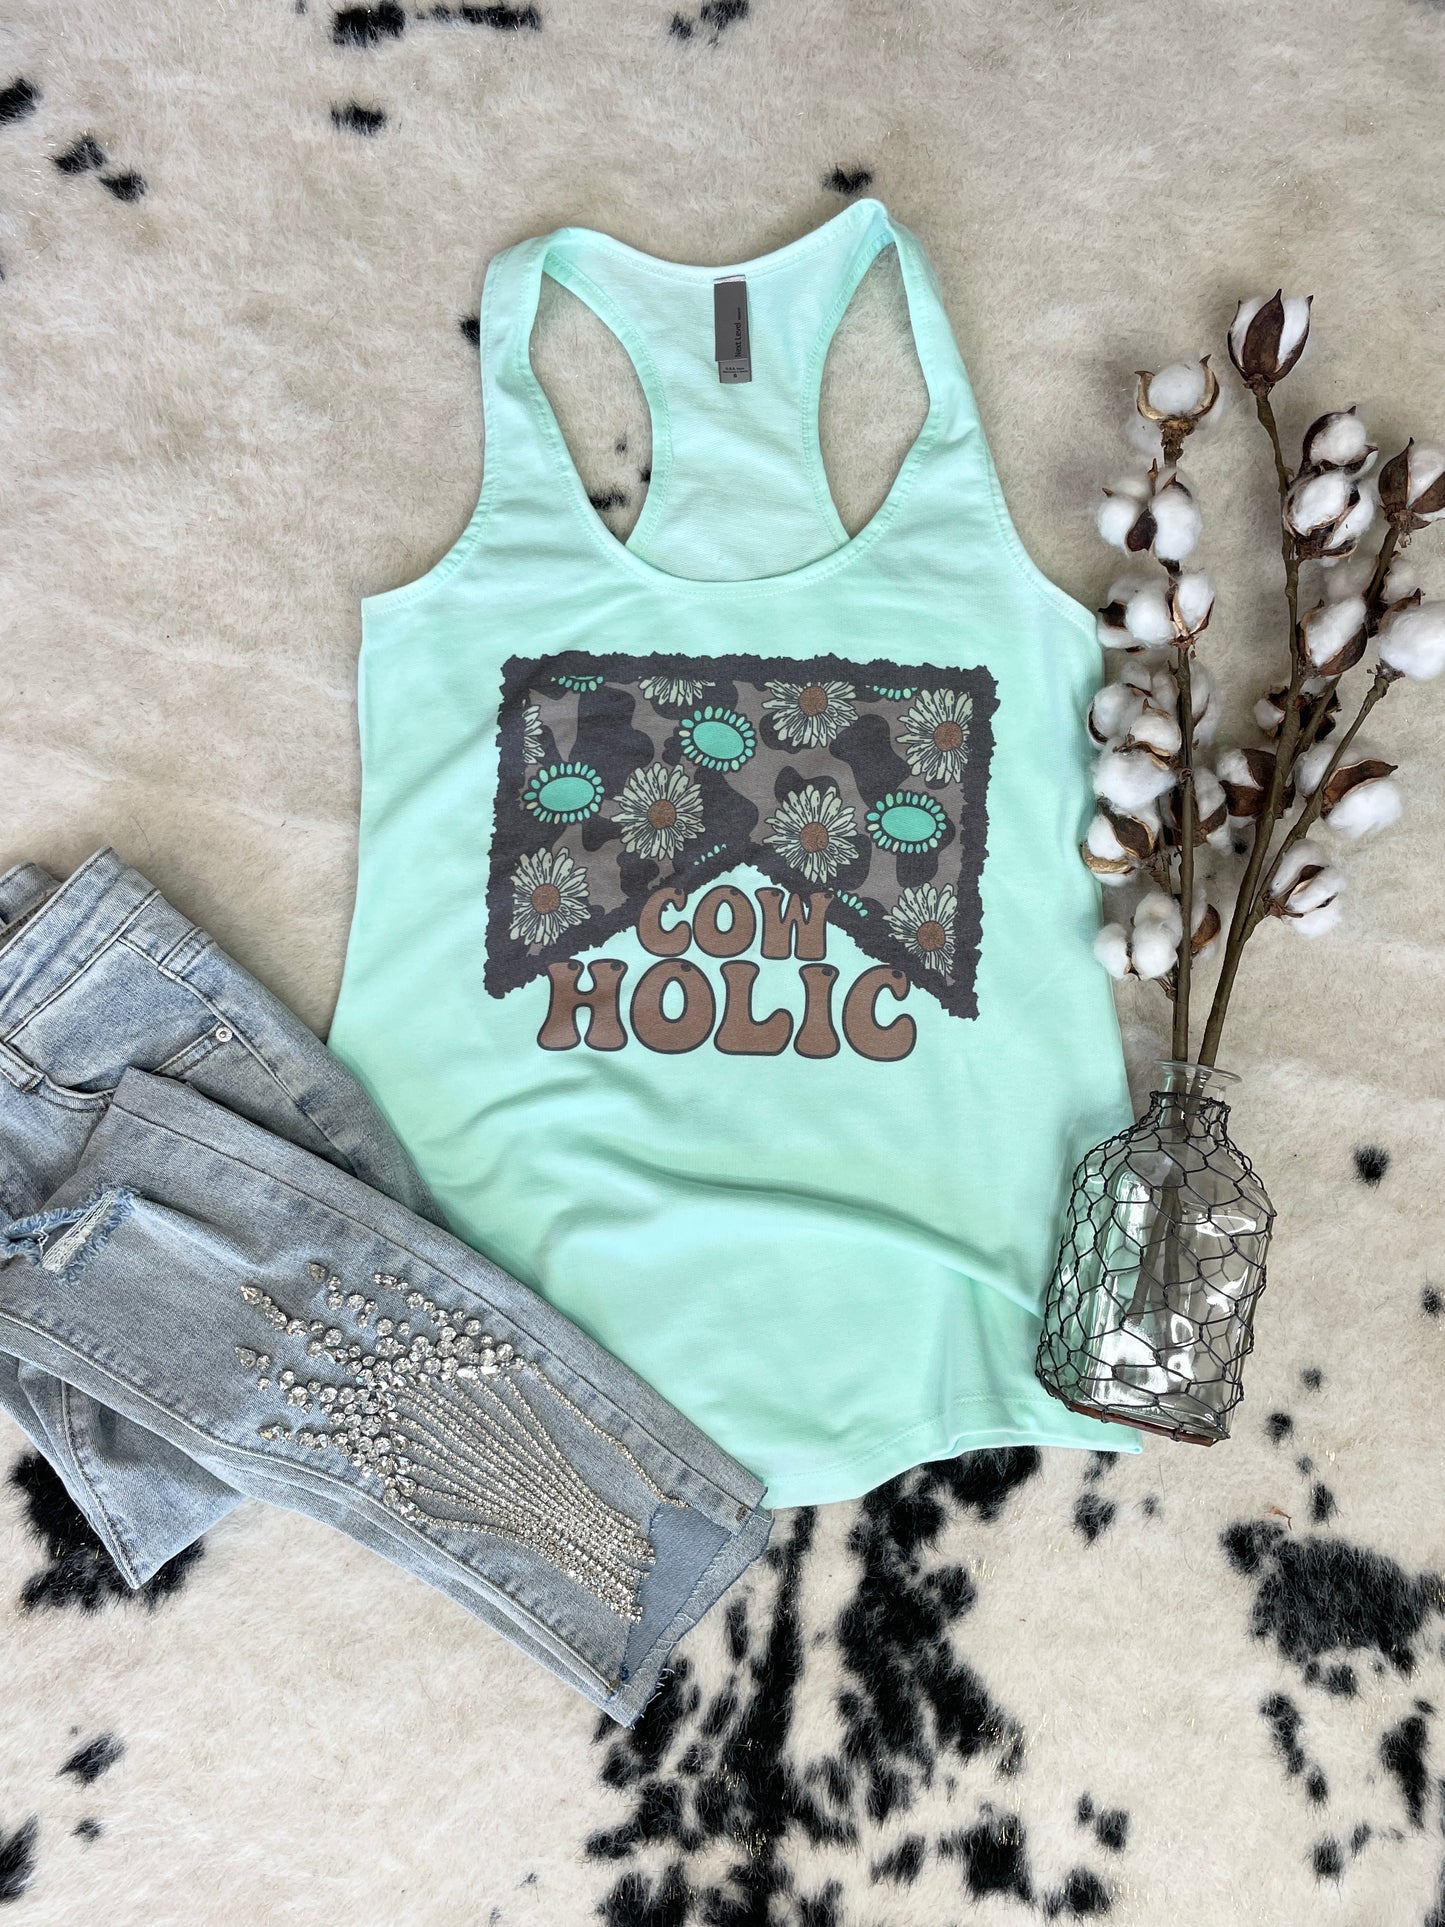 Cigarette Cowholic Teal Tank Top